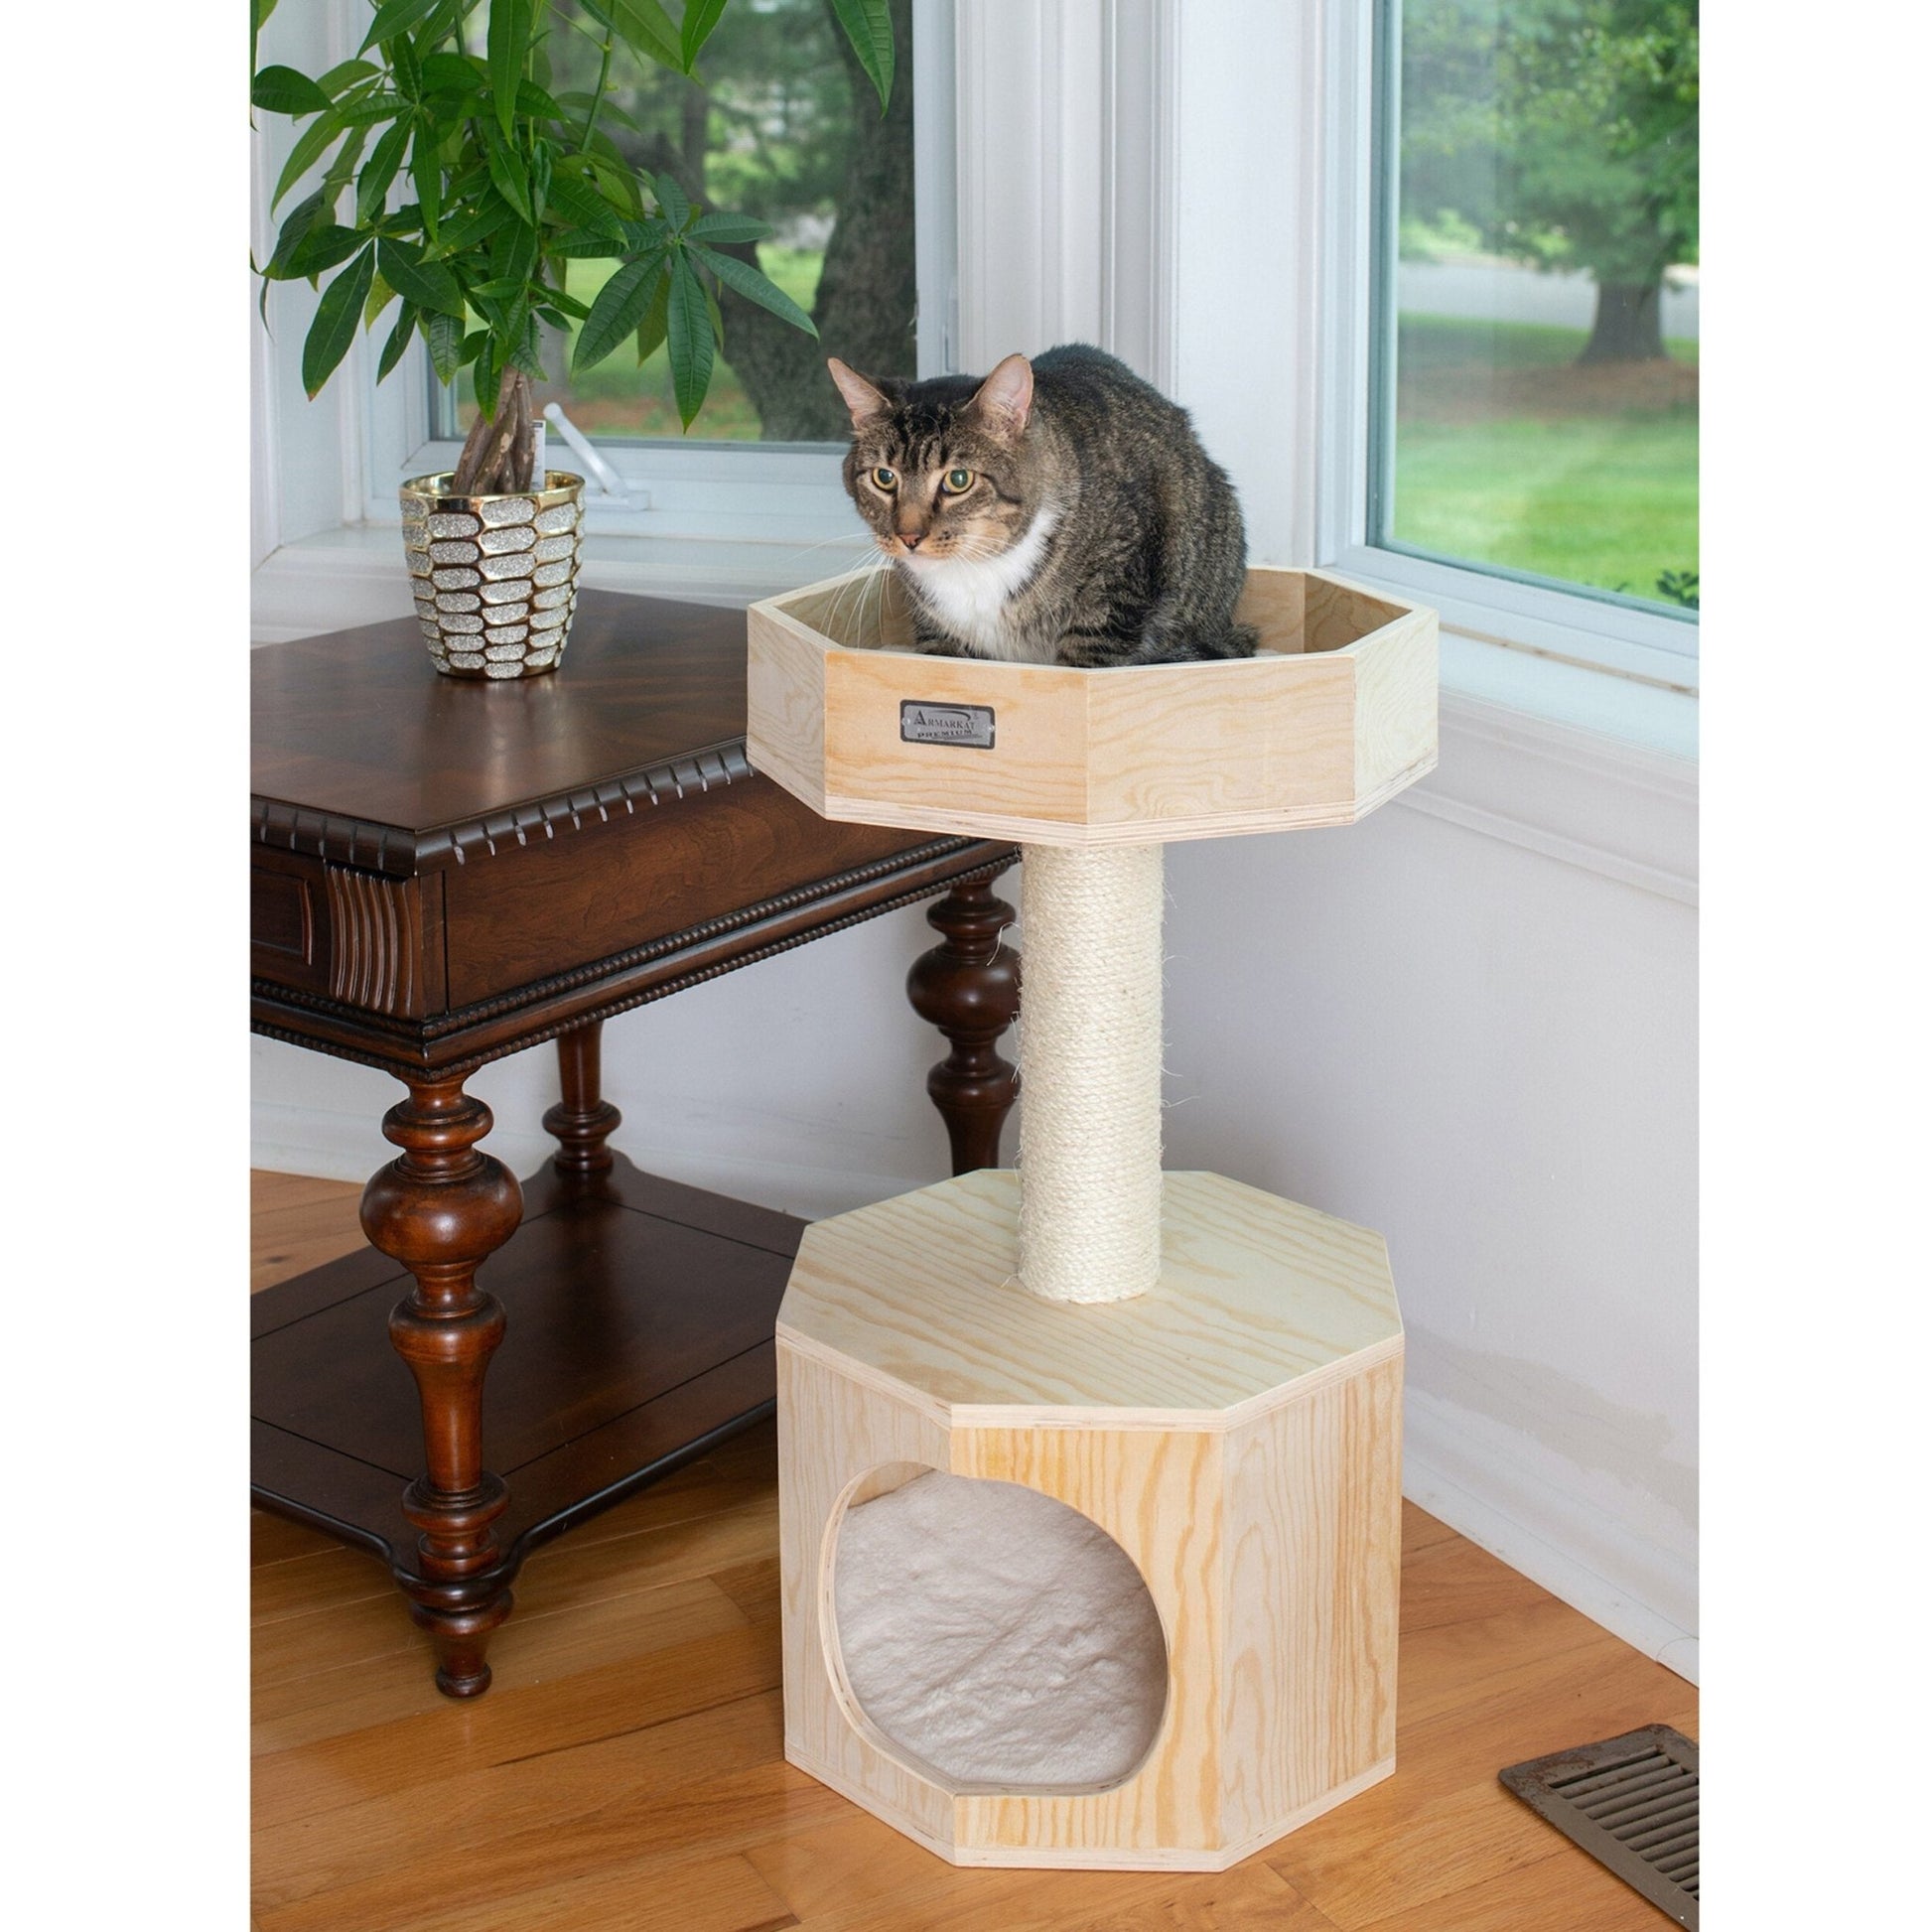 a cat sitting on a deluxe cat tree